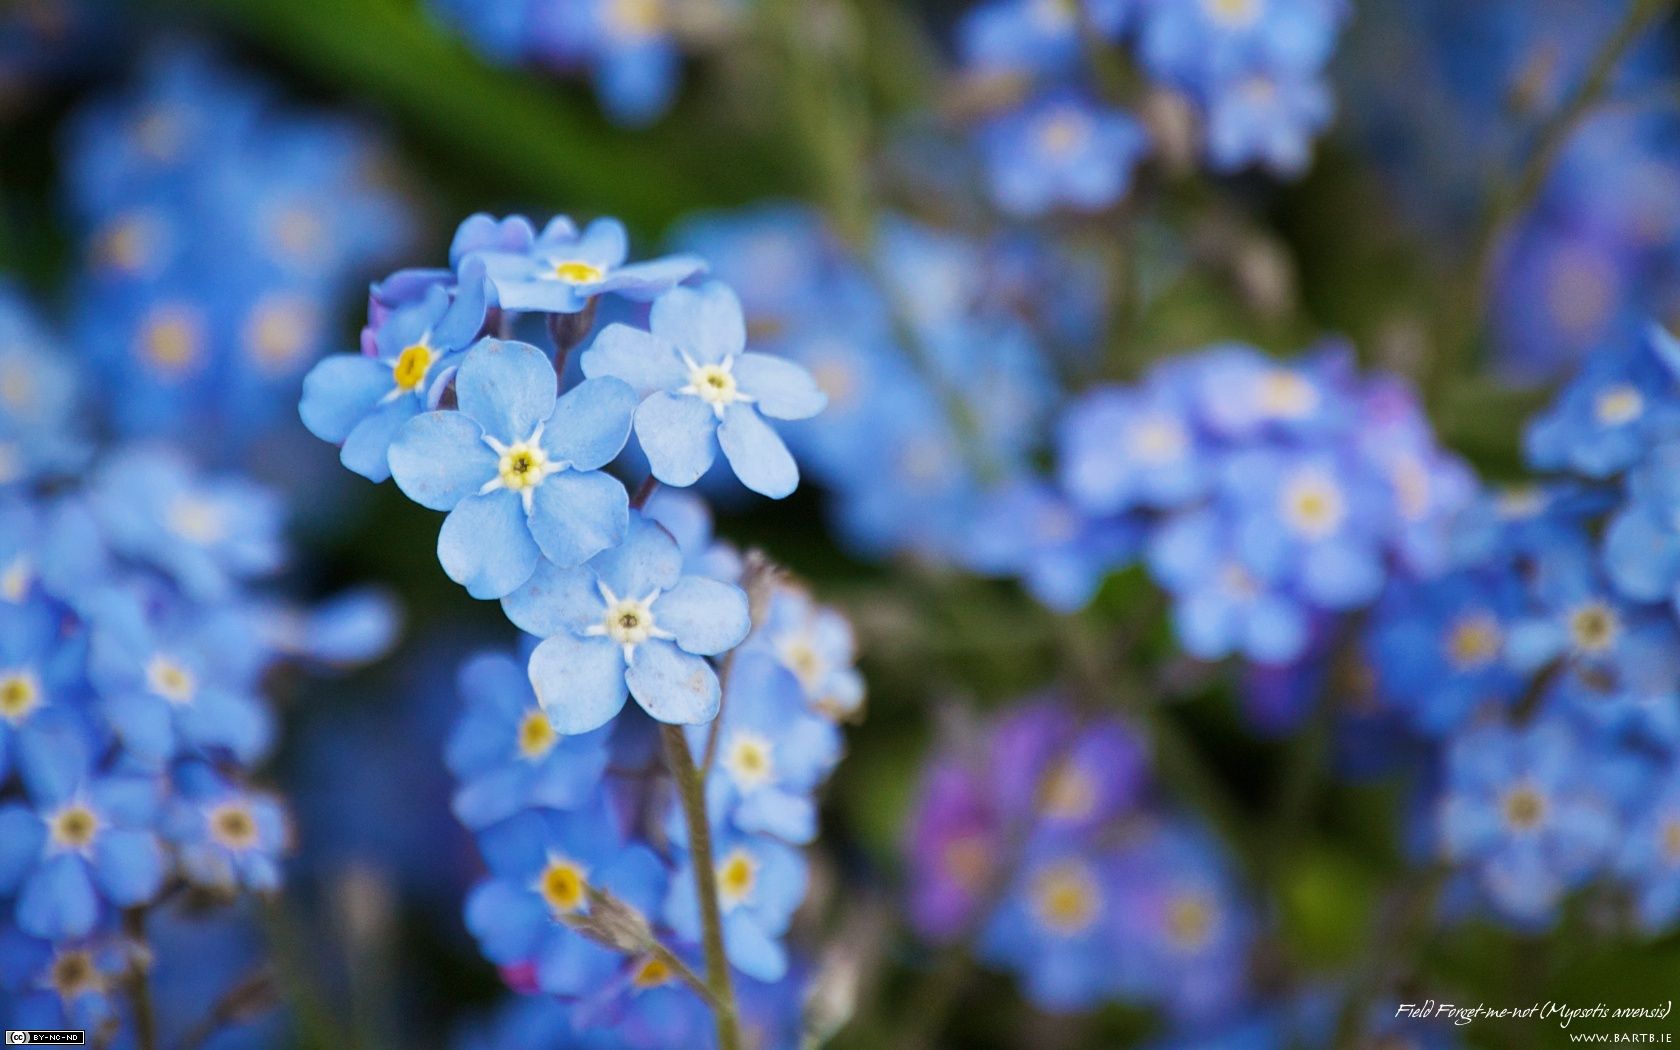 Forget Me Not Wallpaper. Forget Me Not Background, Forget Me Not White Background And Forget Me Not Wallpaper